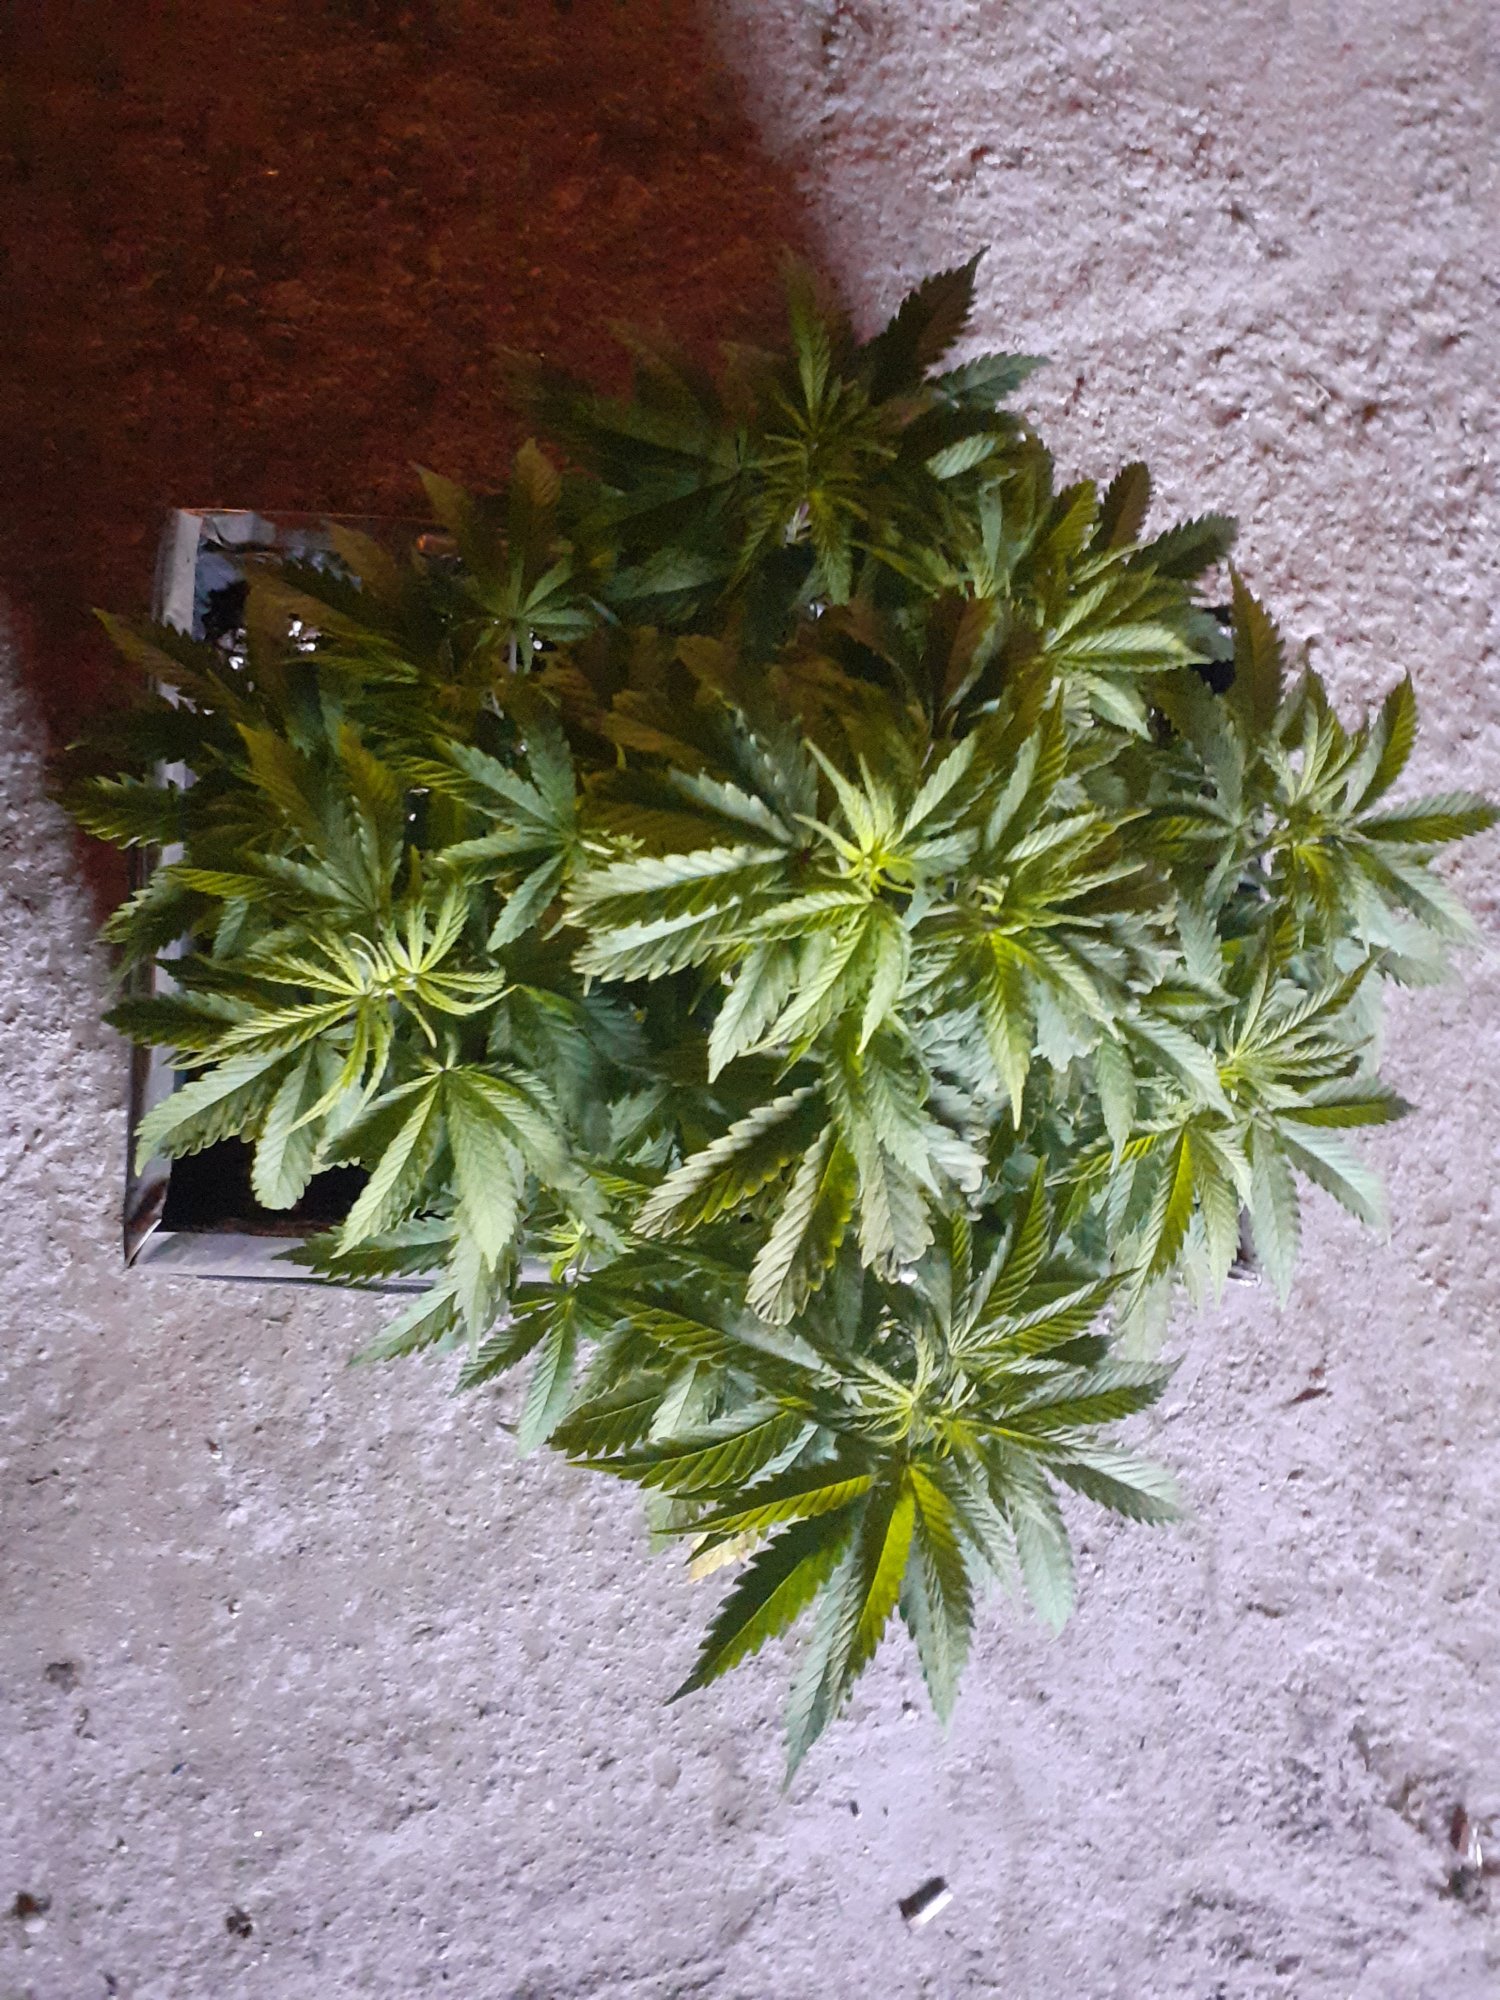 Help what deficiency is this 5